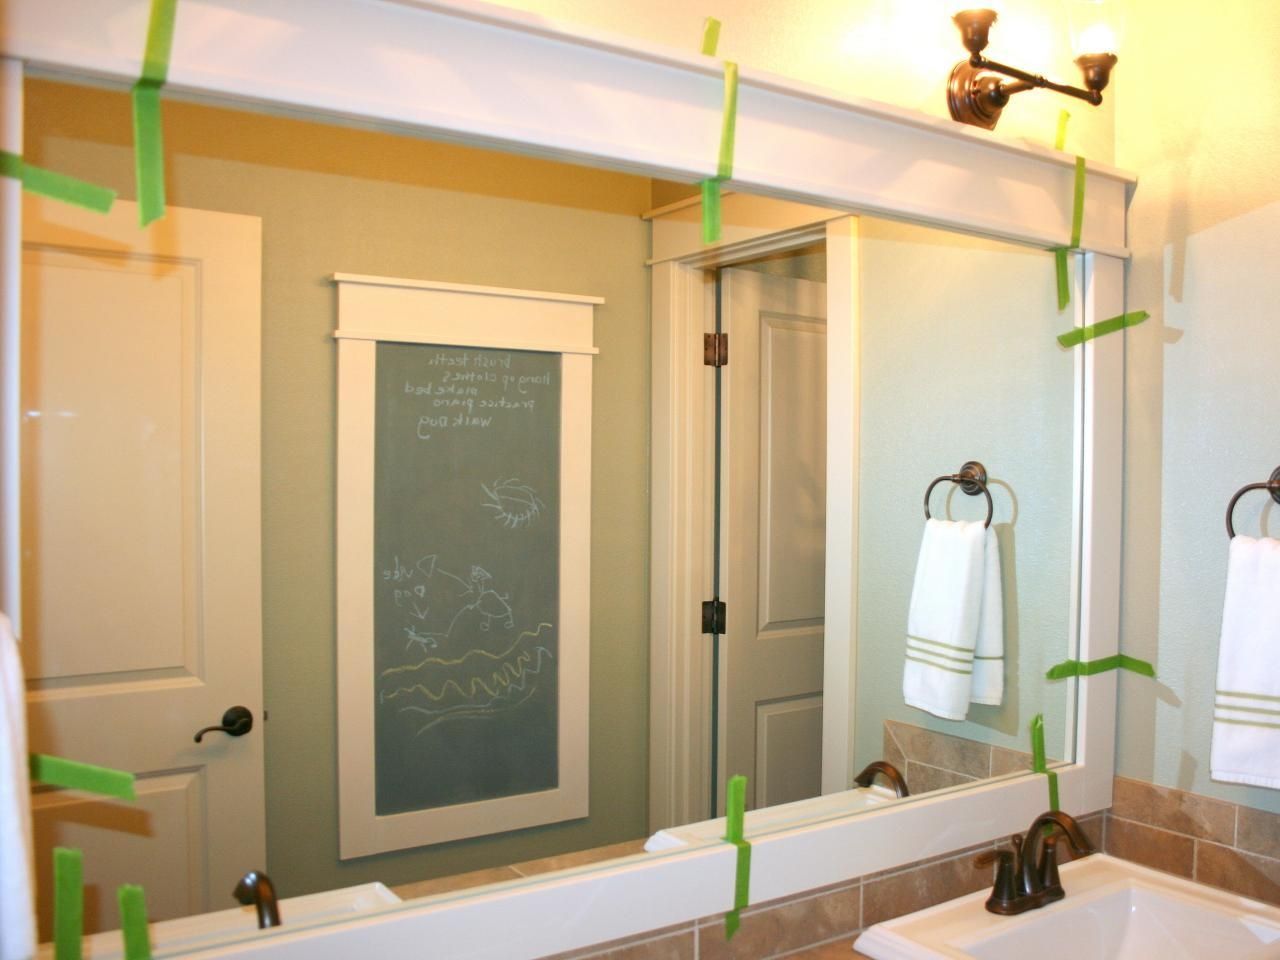 Bathrooms Design : Bathroom Framed Mirrors Round Bathroom Mirrors For Large Framed Bathroom Wall Mirrors (View 5 of 20)